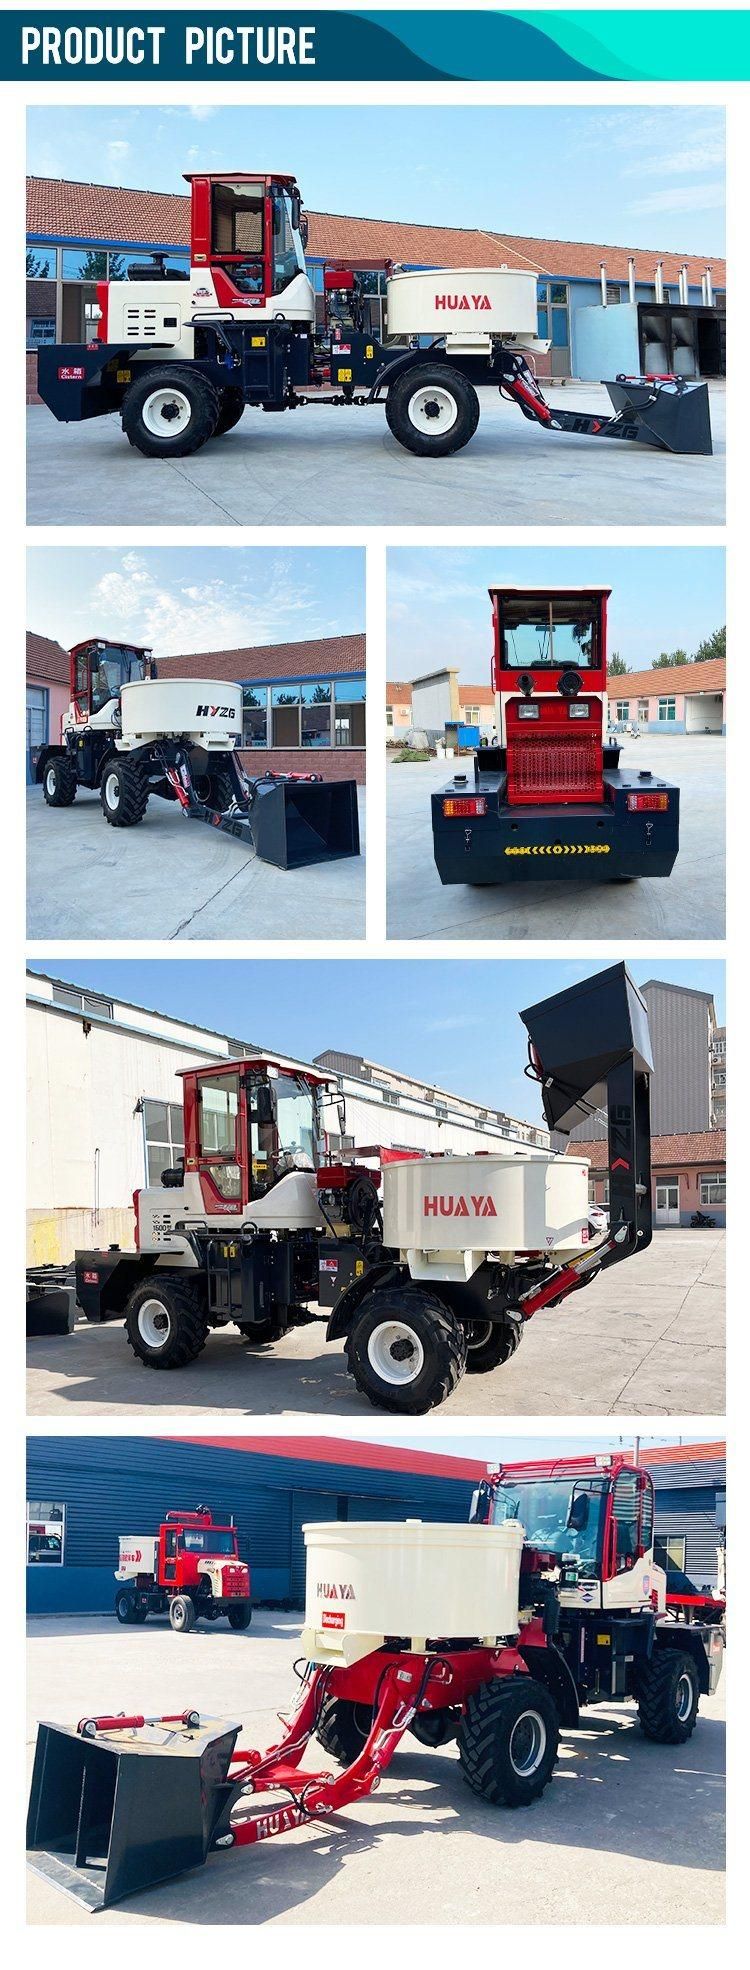 New Mixing Huaya with Pump Automatic Loading Concrete Mixer Truck